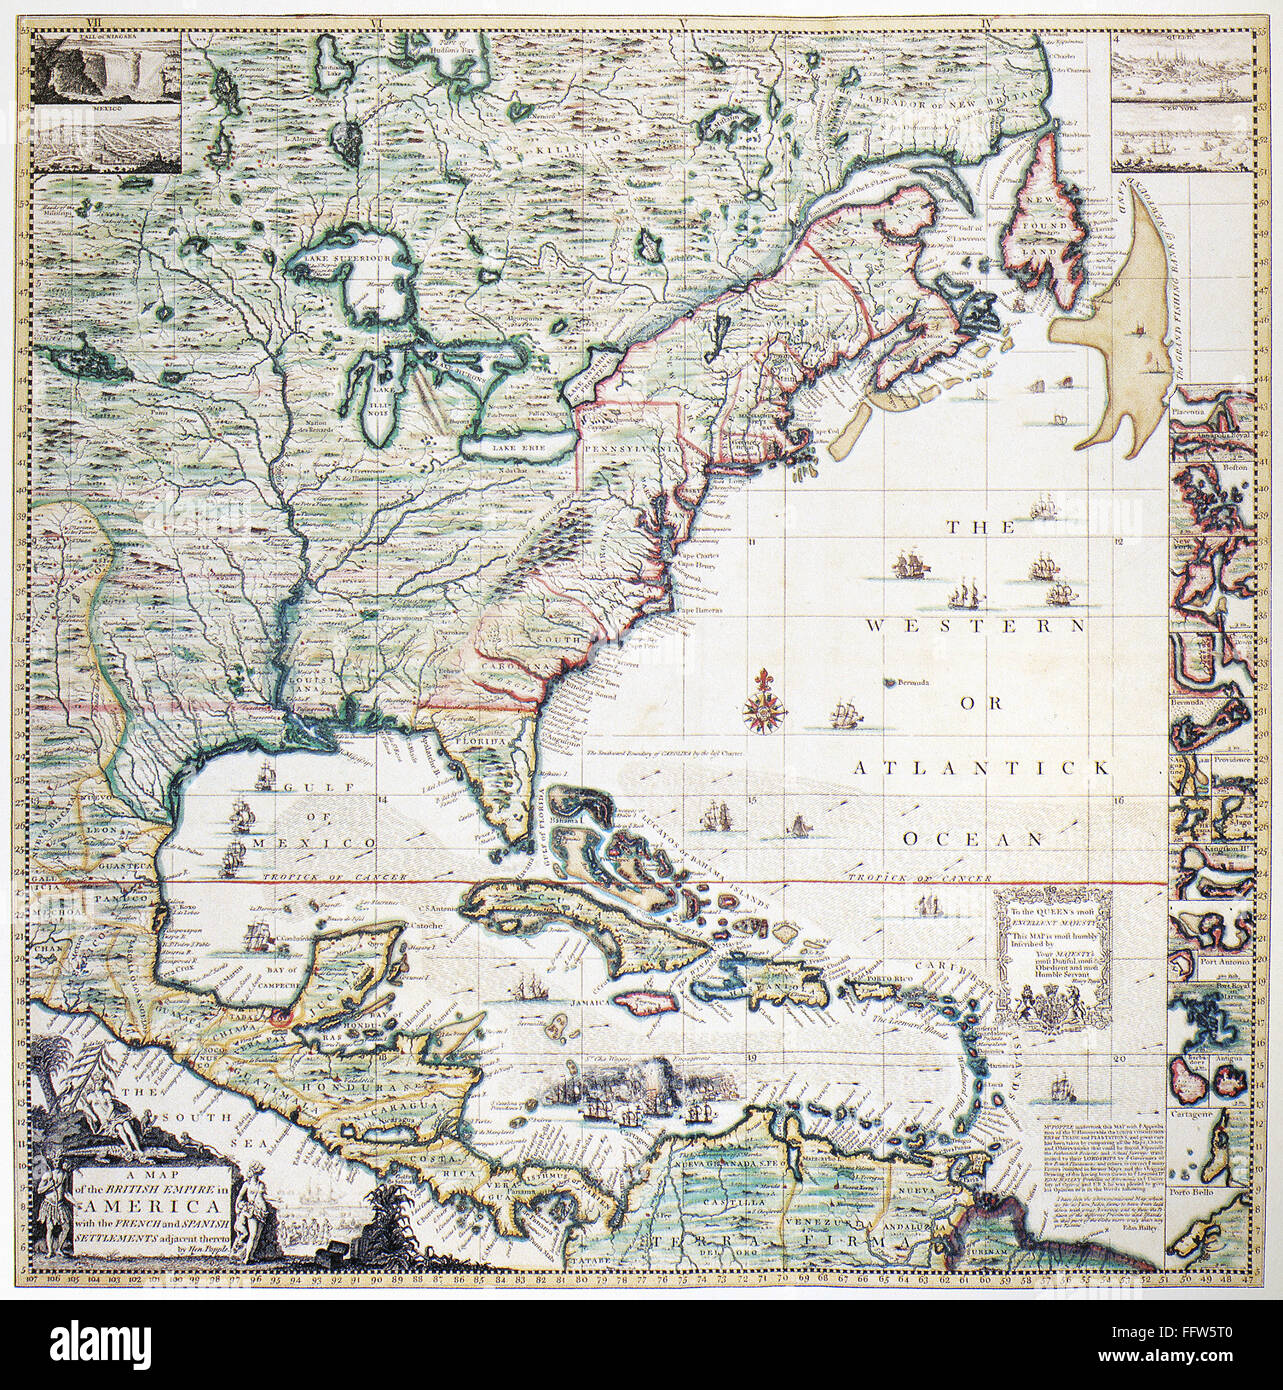 MAP OF AMERICA, 1733. /nMap by Henry Popple, engraved by William Henry Toms, of Eastern America, 1733. Stock Photo